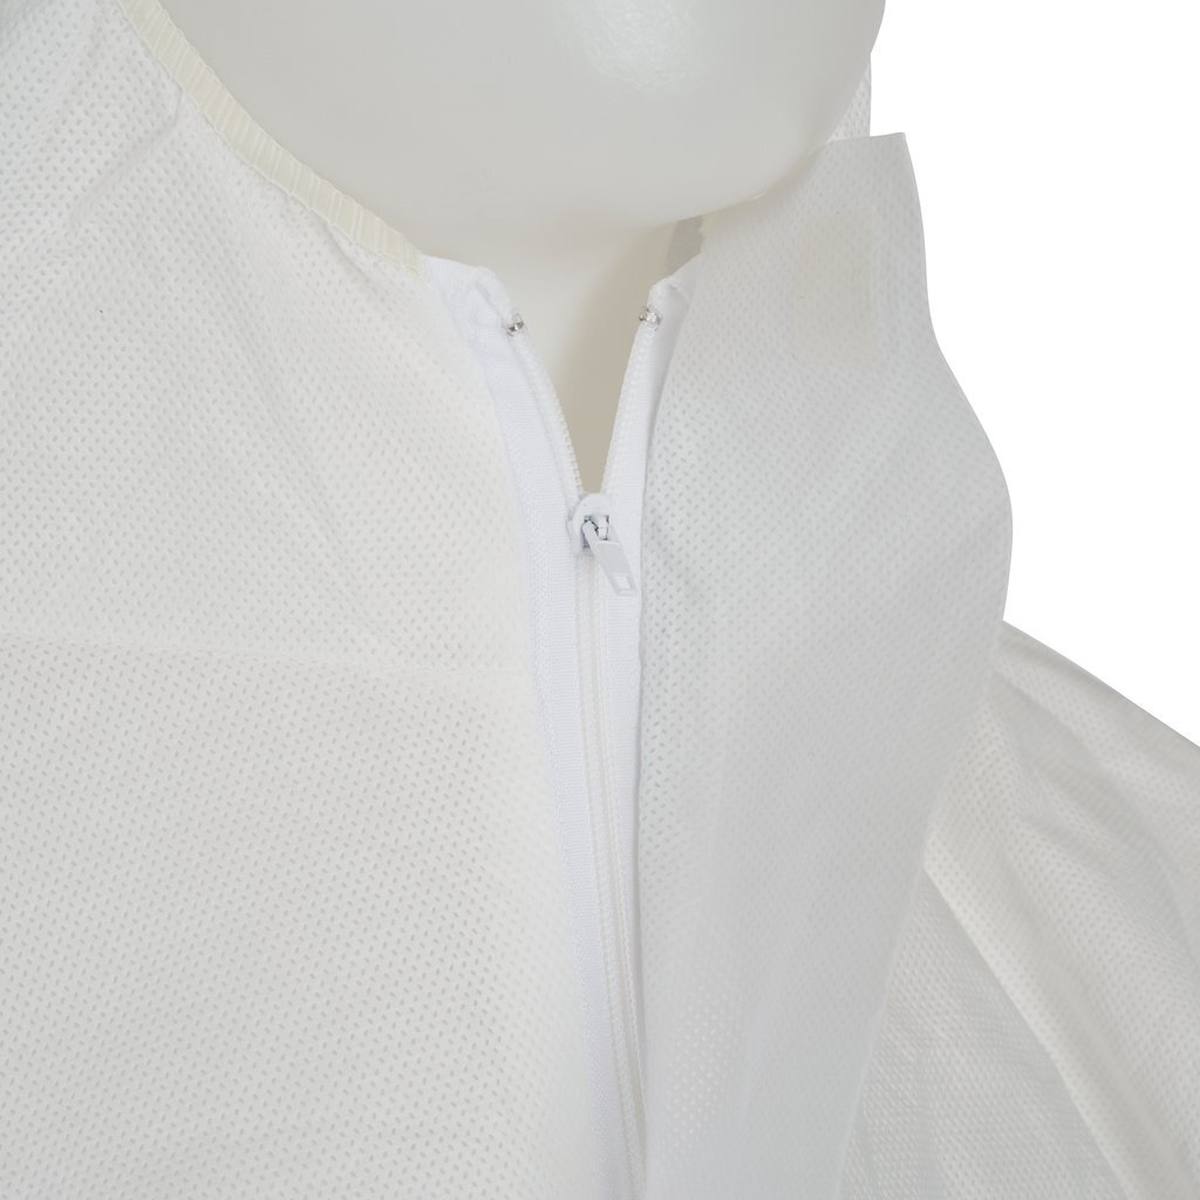 3M 4515W Protective coverall, white, TYPE 5/6, size 2XL, material SMMS low-lint, elastic band finish